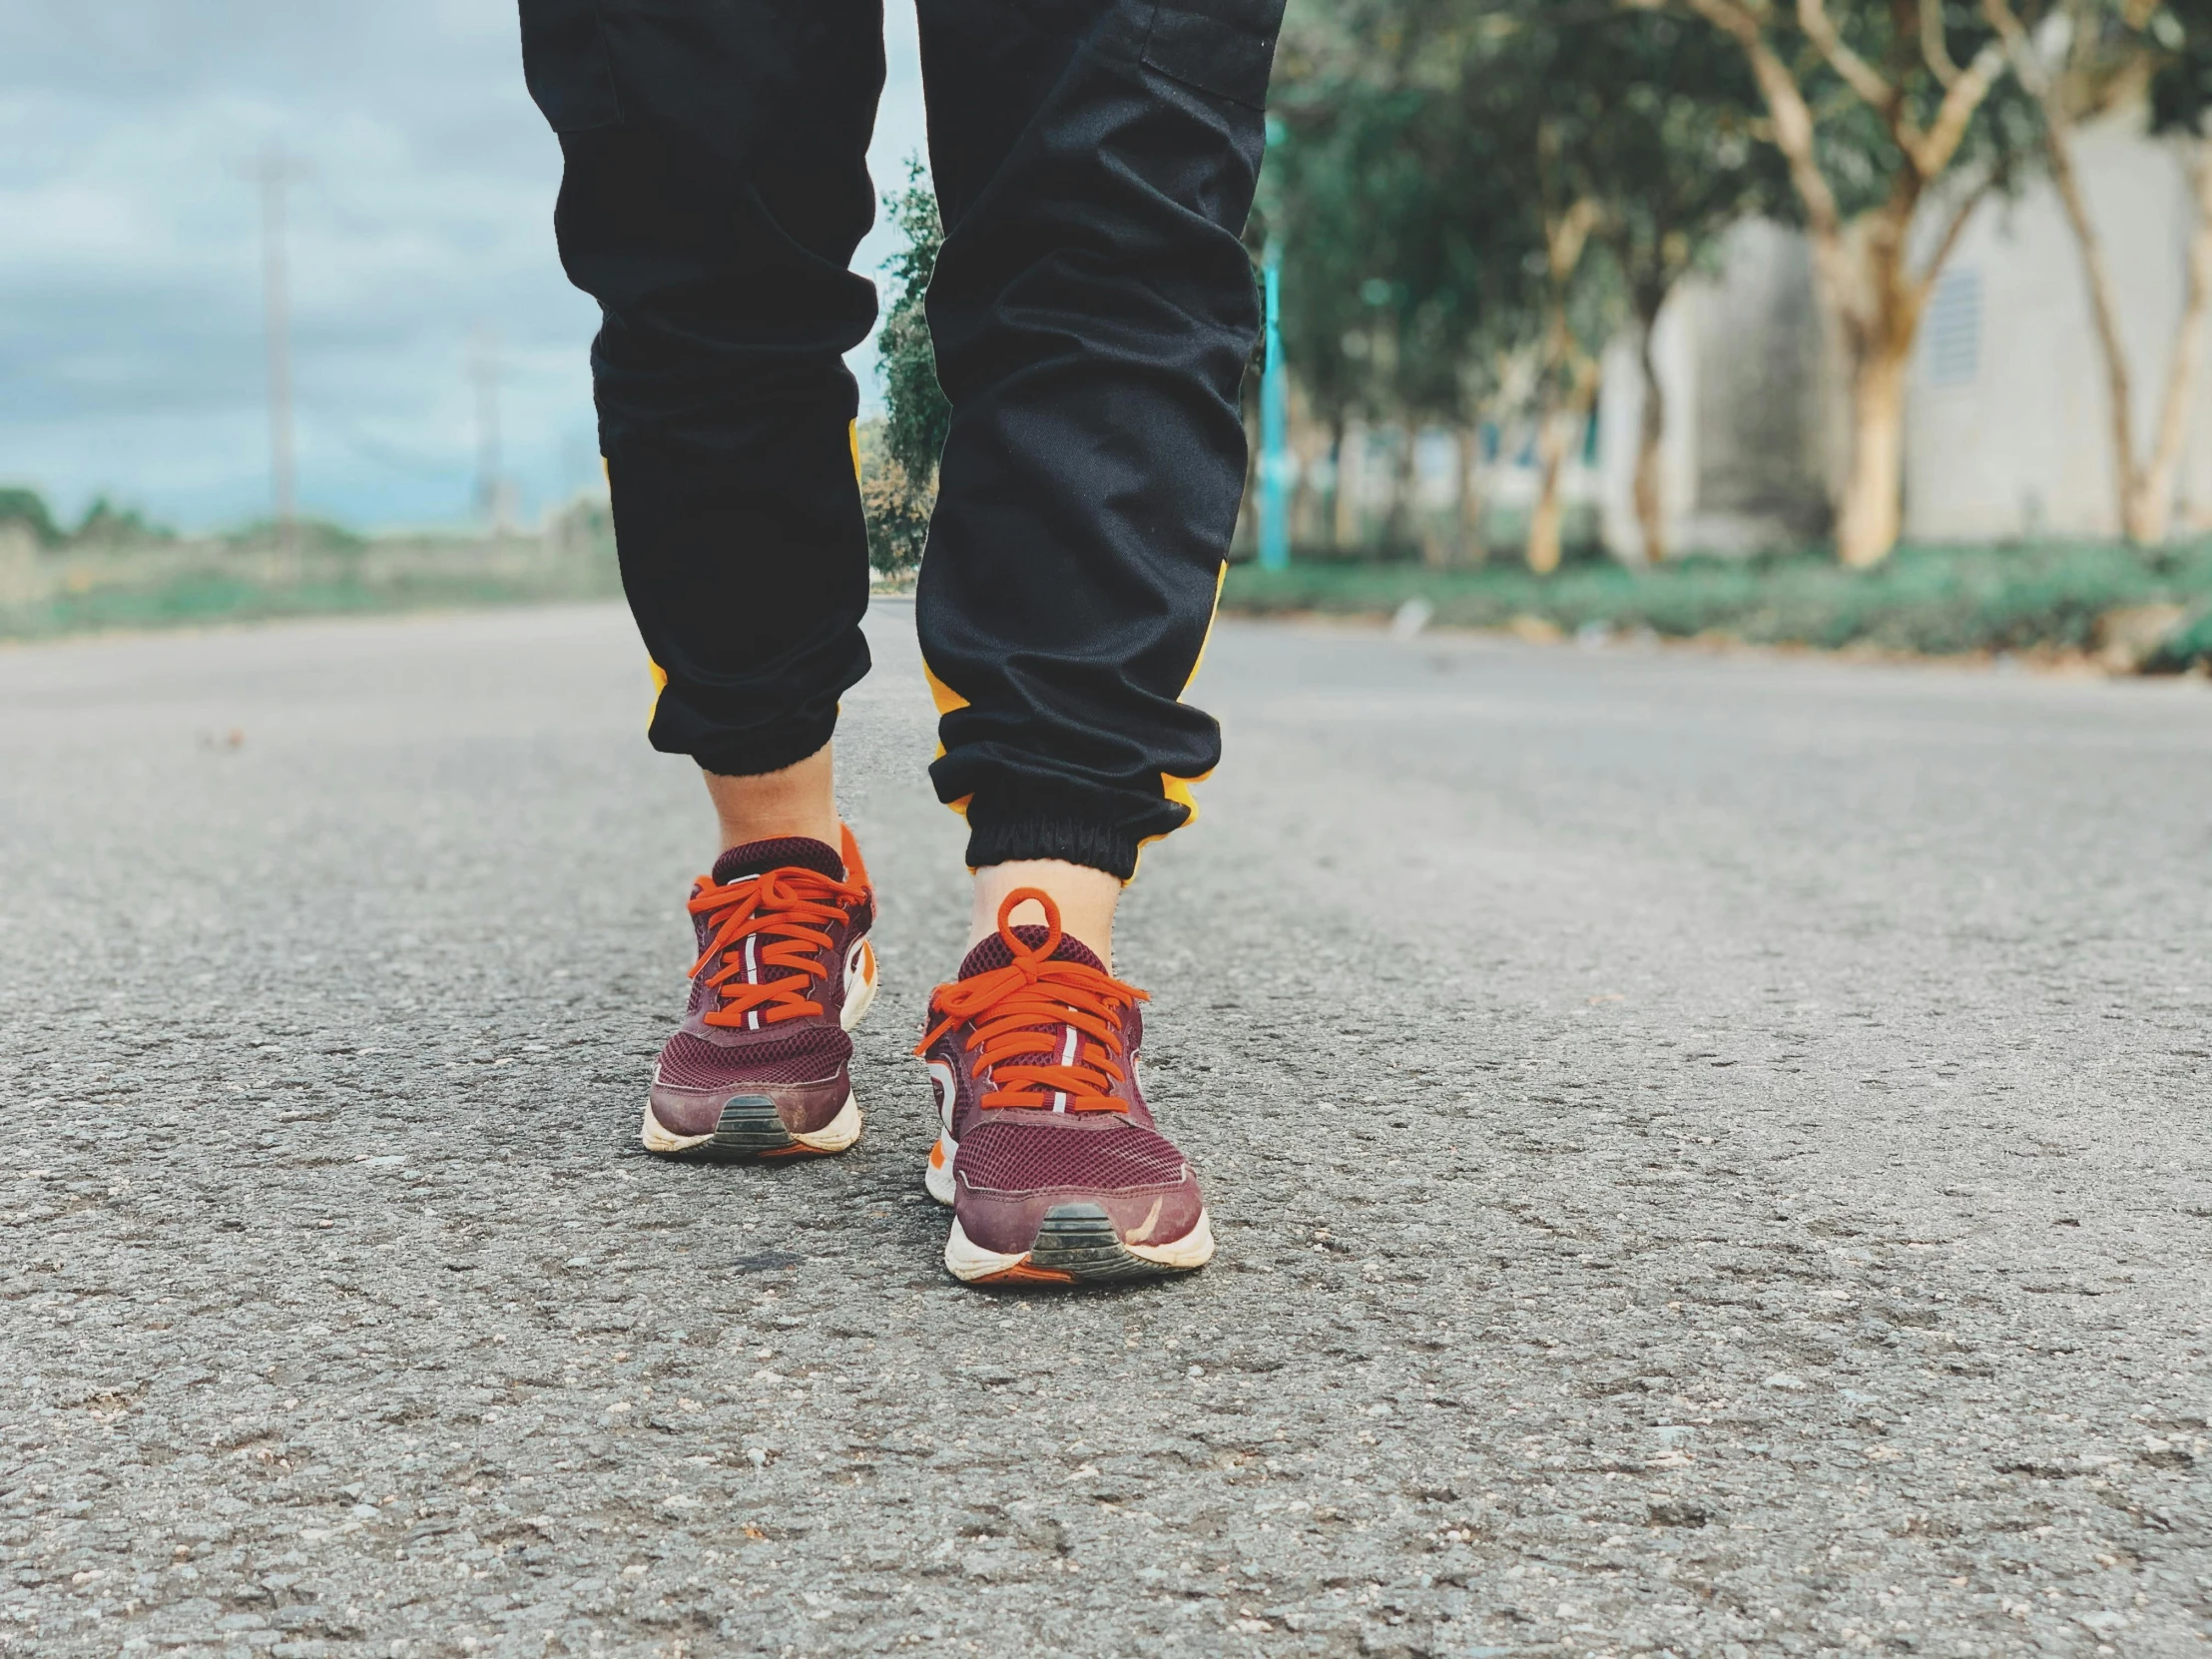 a close up of a person walking on a road, 5k, on the ground, avatar image, sport clothing